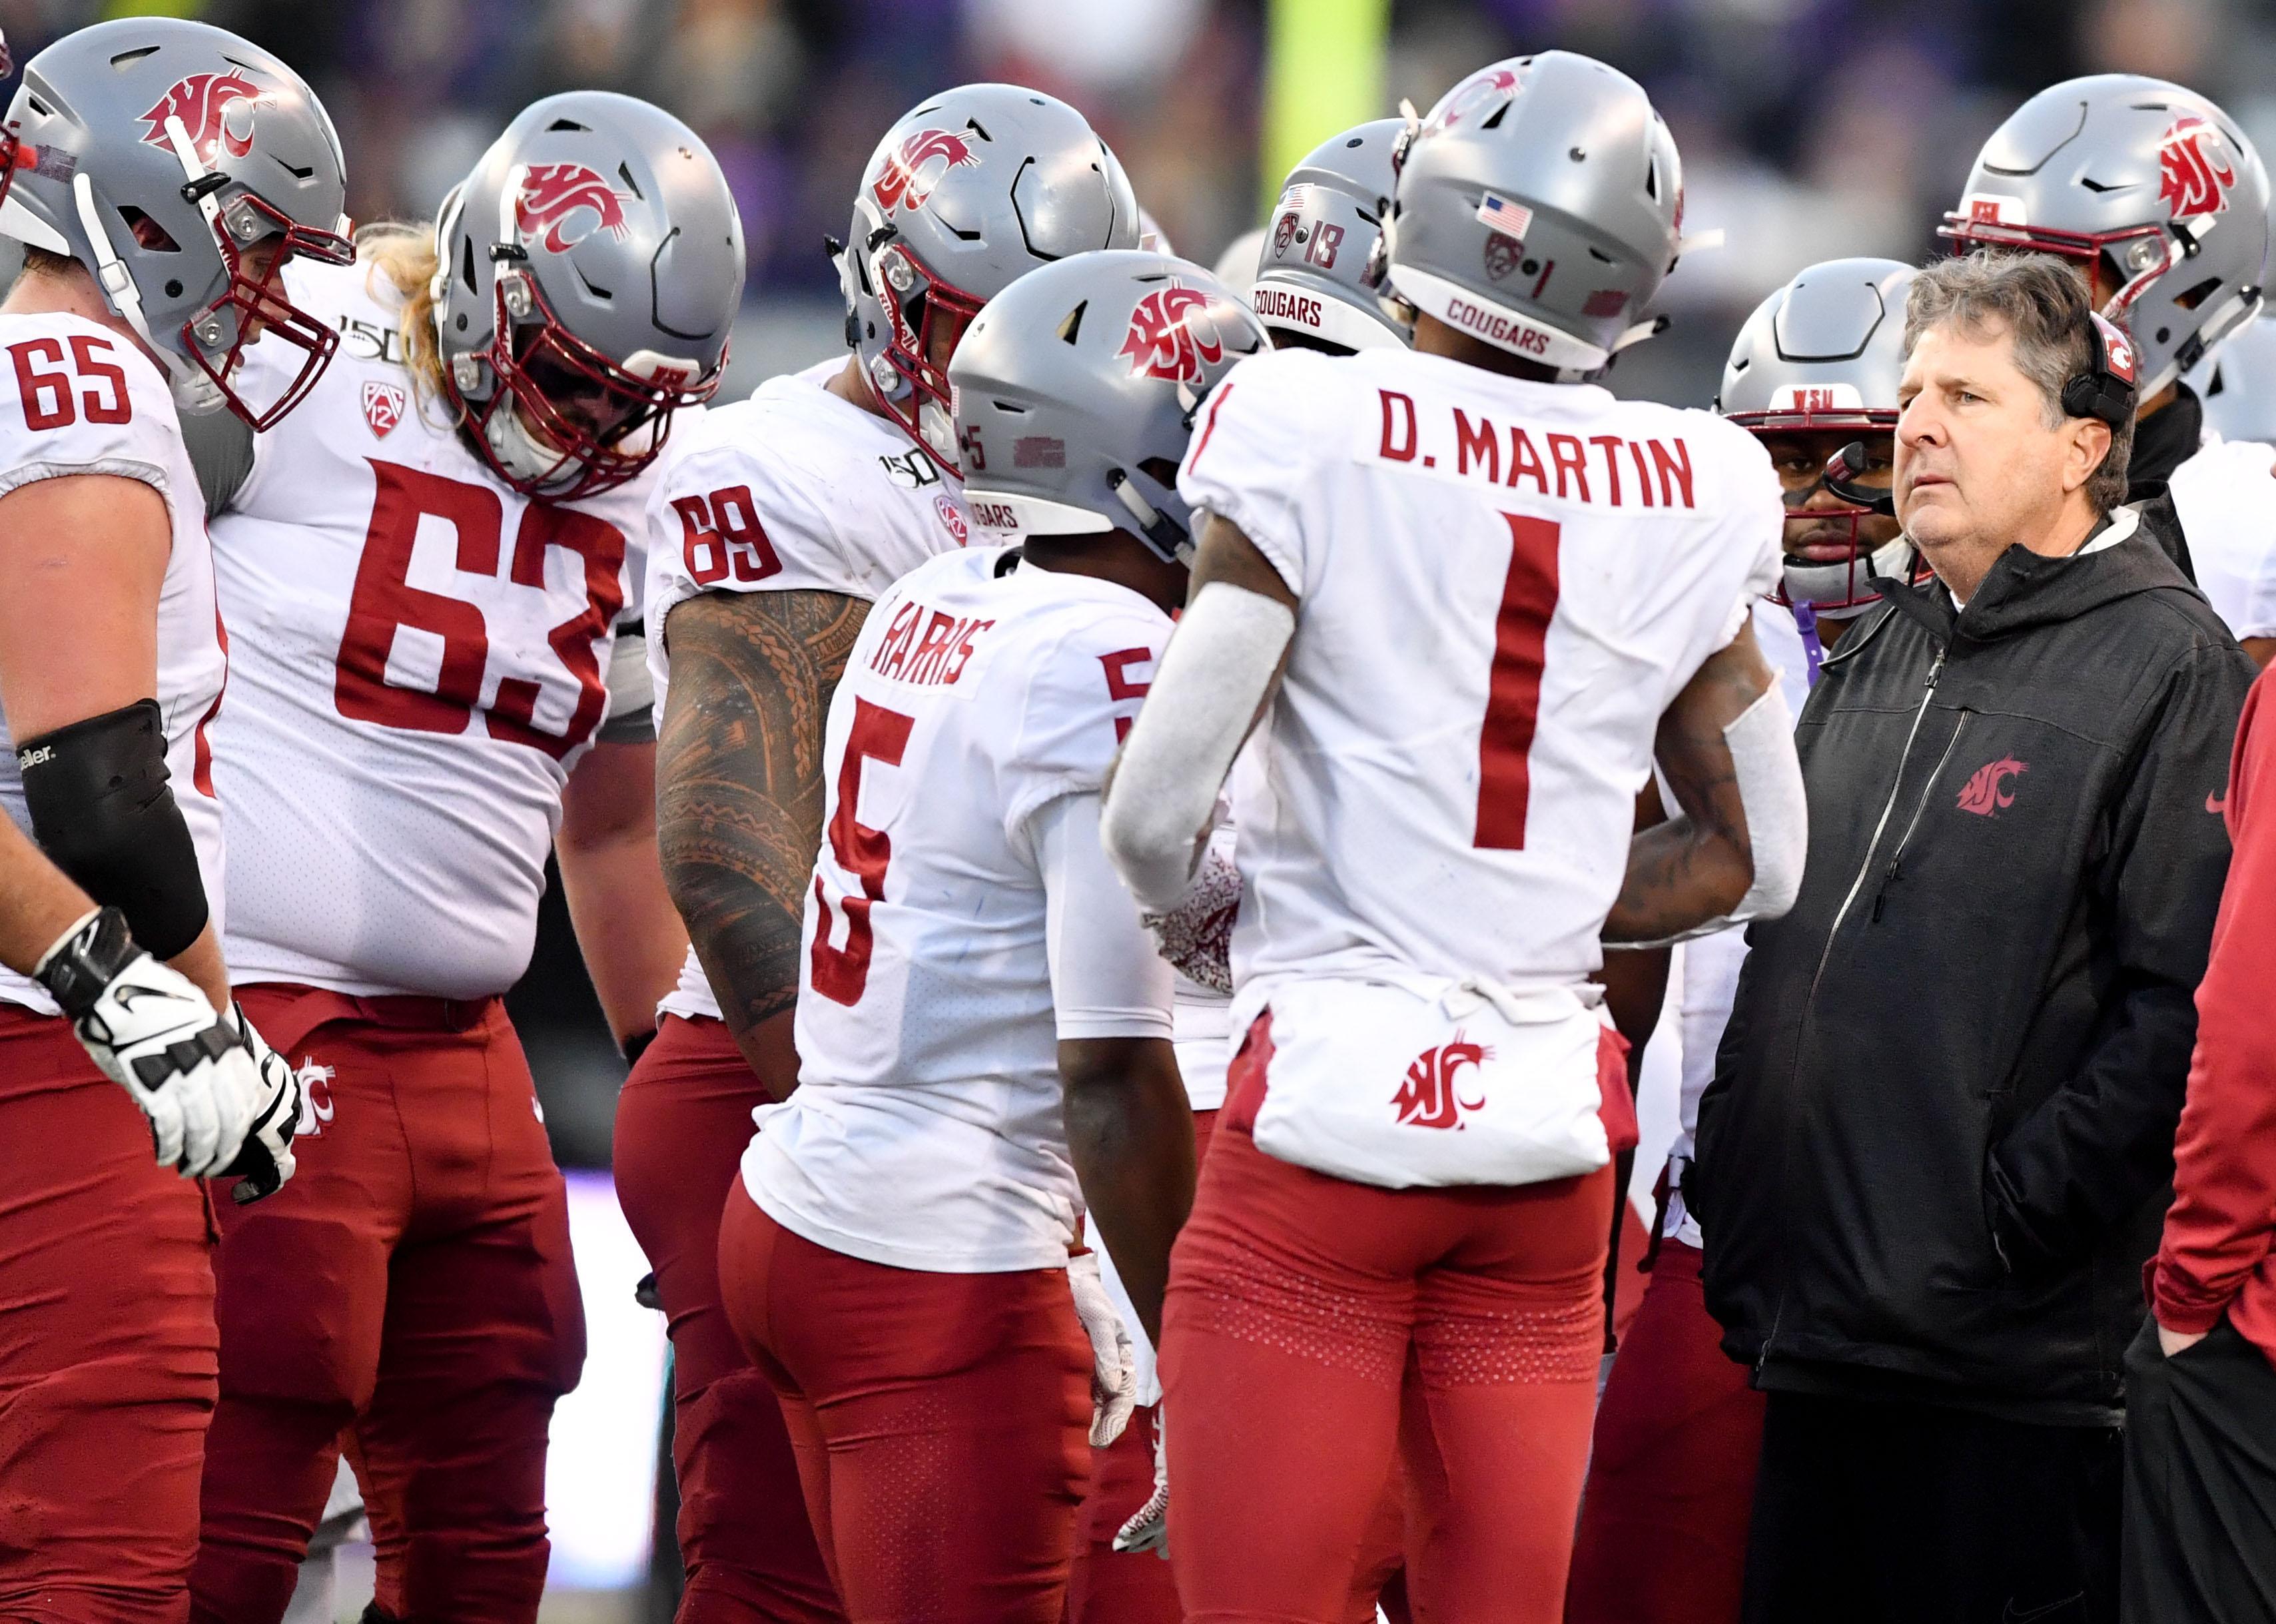 Excerpt: Washington State coach Mike Leach's postgame